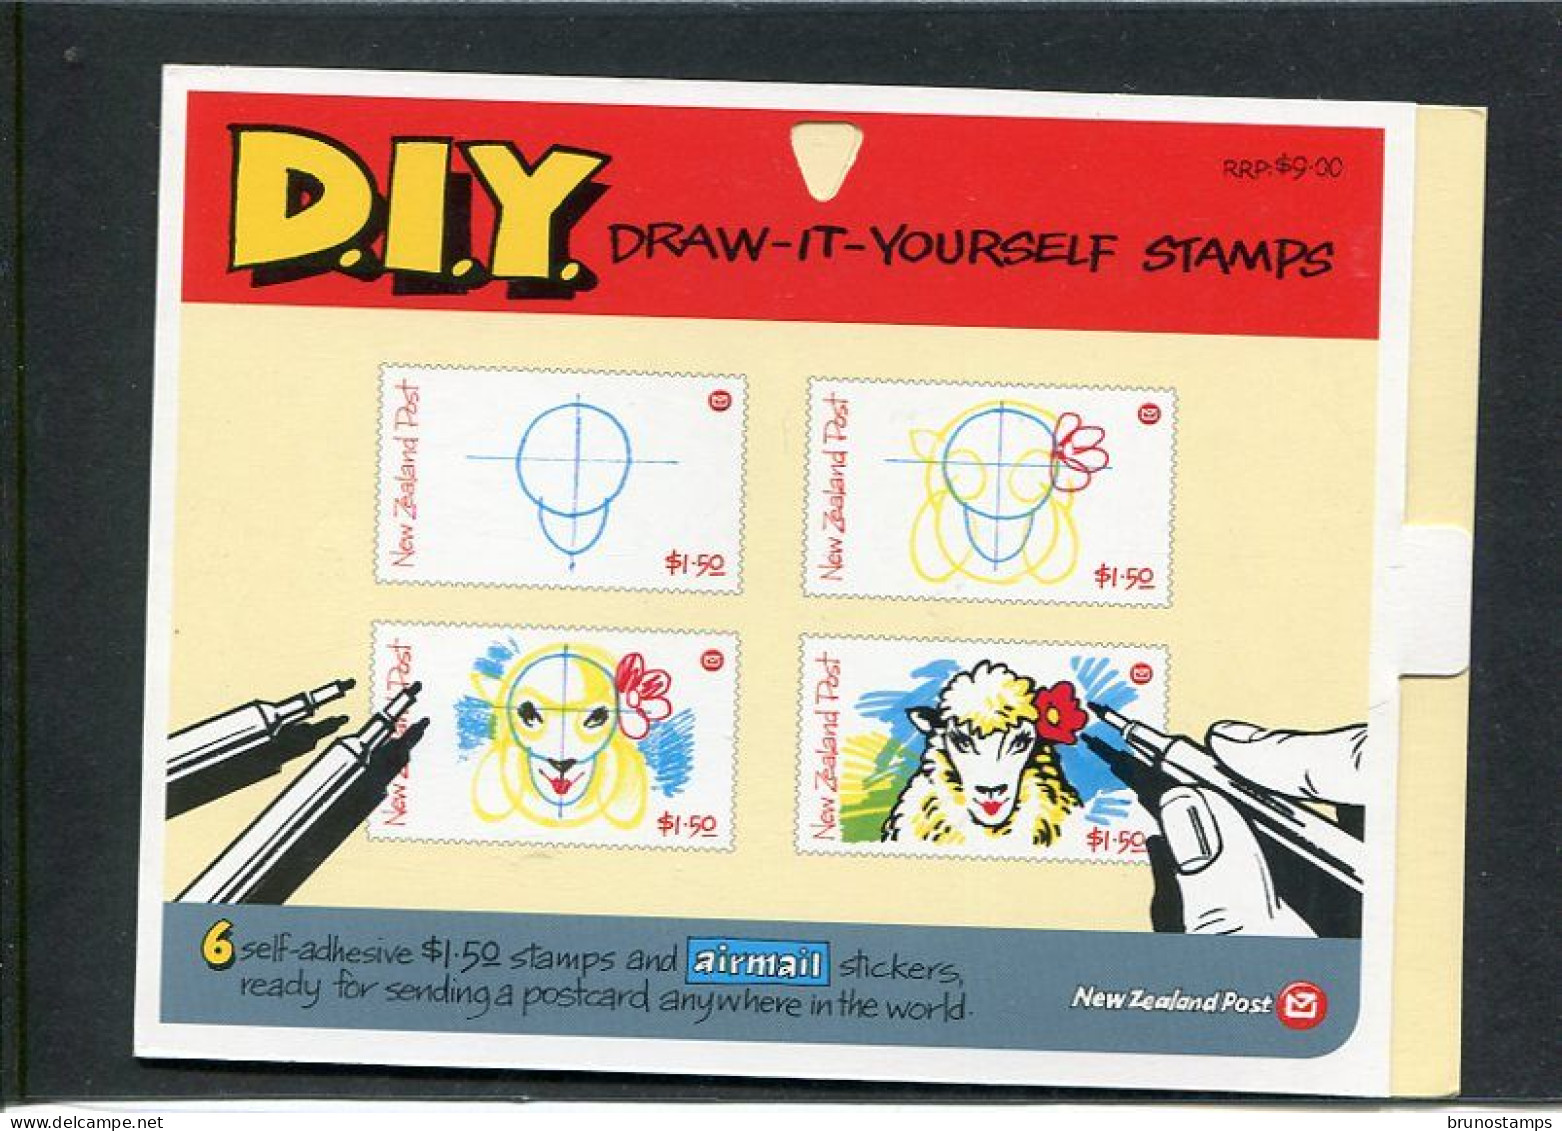 NEW ZEALAND - 2004  DRAW IT YOURSELF STAMPS  SELF ADHESIVE  SHEETLET  OF 6 MINT NH - Nuevos